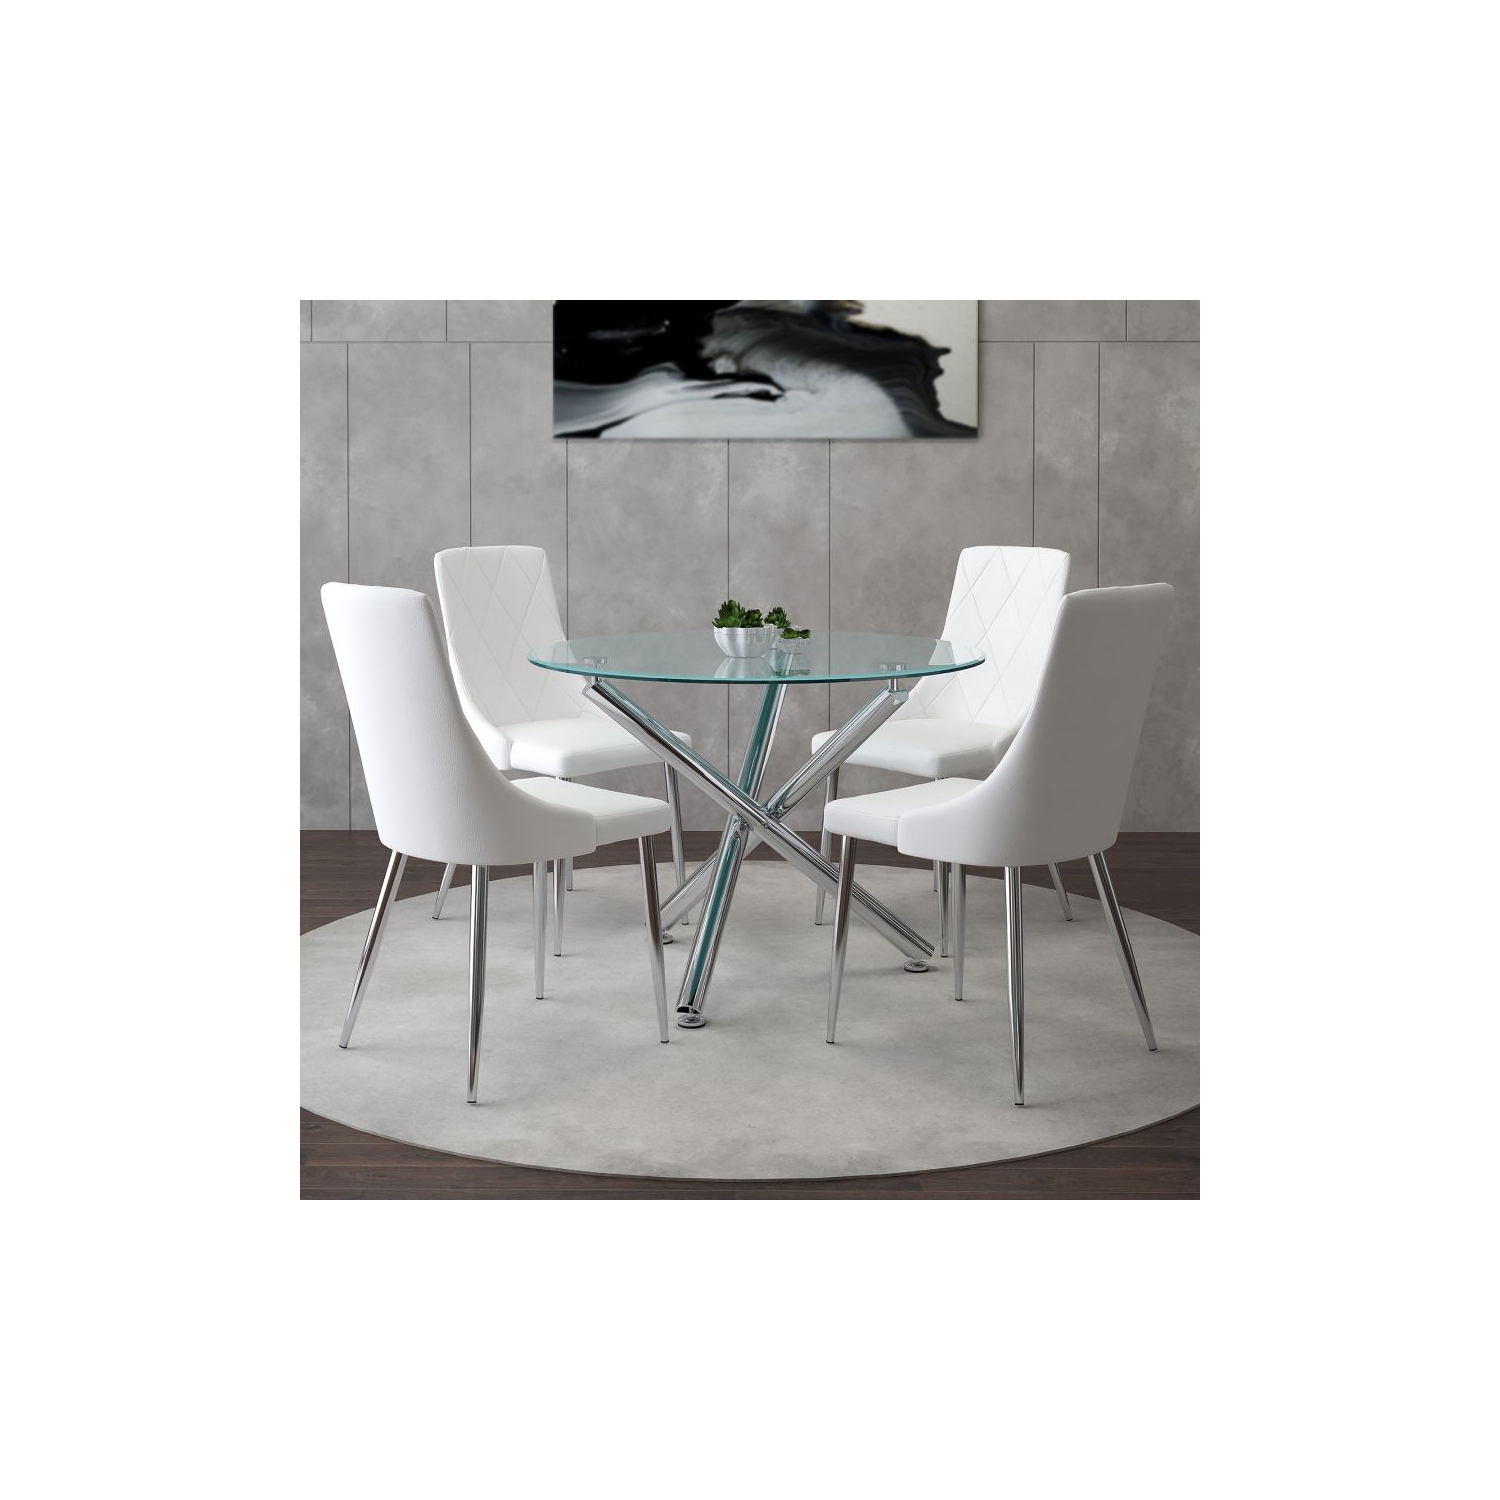 Cosmic Homes 5pc Dining Set in Chrome with White Chair, Round Modern Kitchen Table and 4 Faux Leather Upholstered Chair for Dining Room, Living Room, White